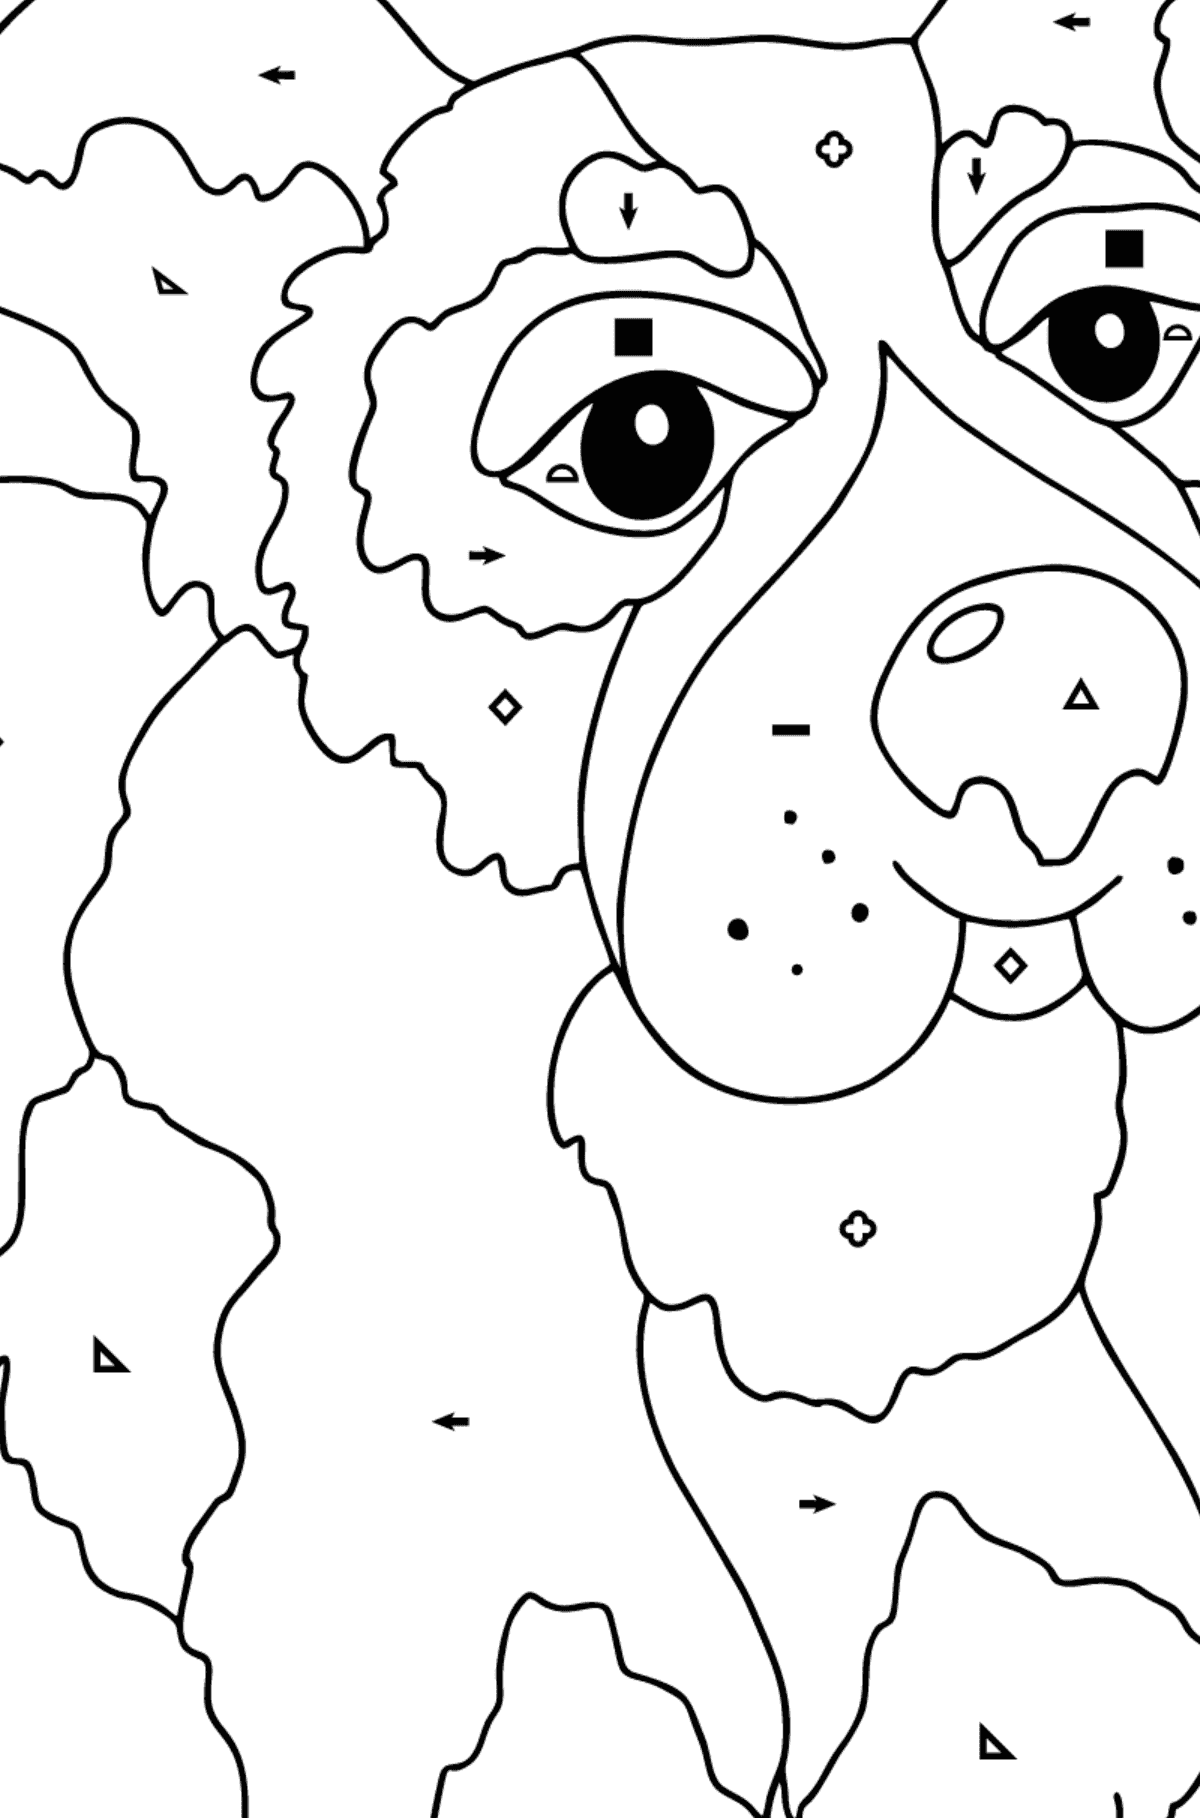 Coloring Page - A Dog is Playing with a Ball for Children  - Color by Symbols and Geometric Shapes